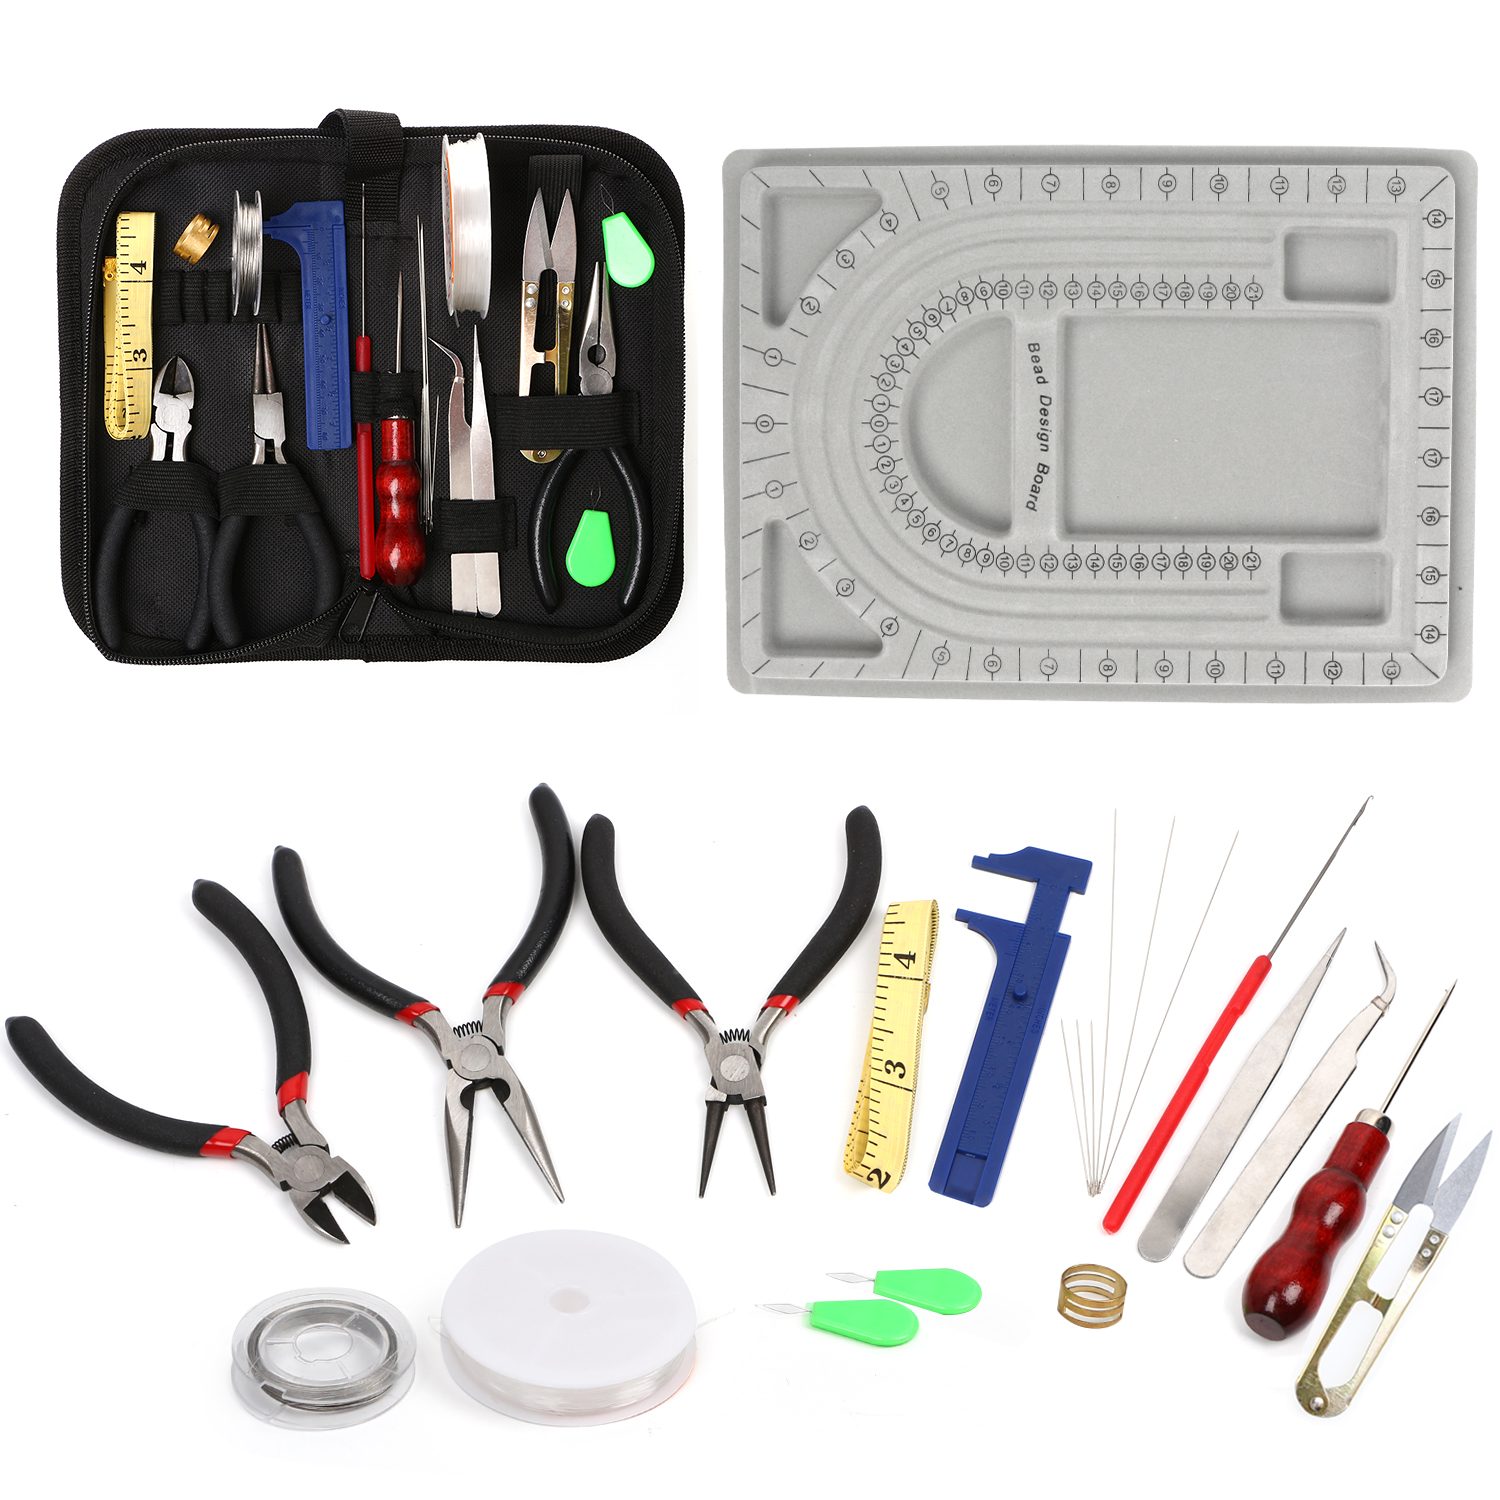 HOTOOLME Jewellery Making Tool Kits,23 Pieces Jewelry Repair Kit with Bead  Design Board – HOTOOLME